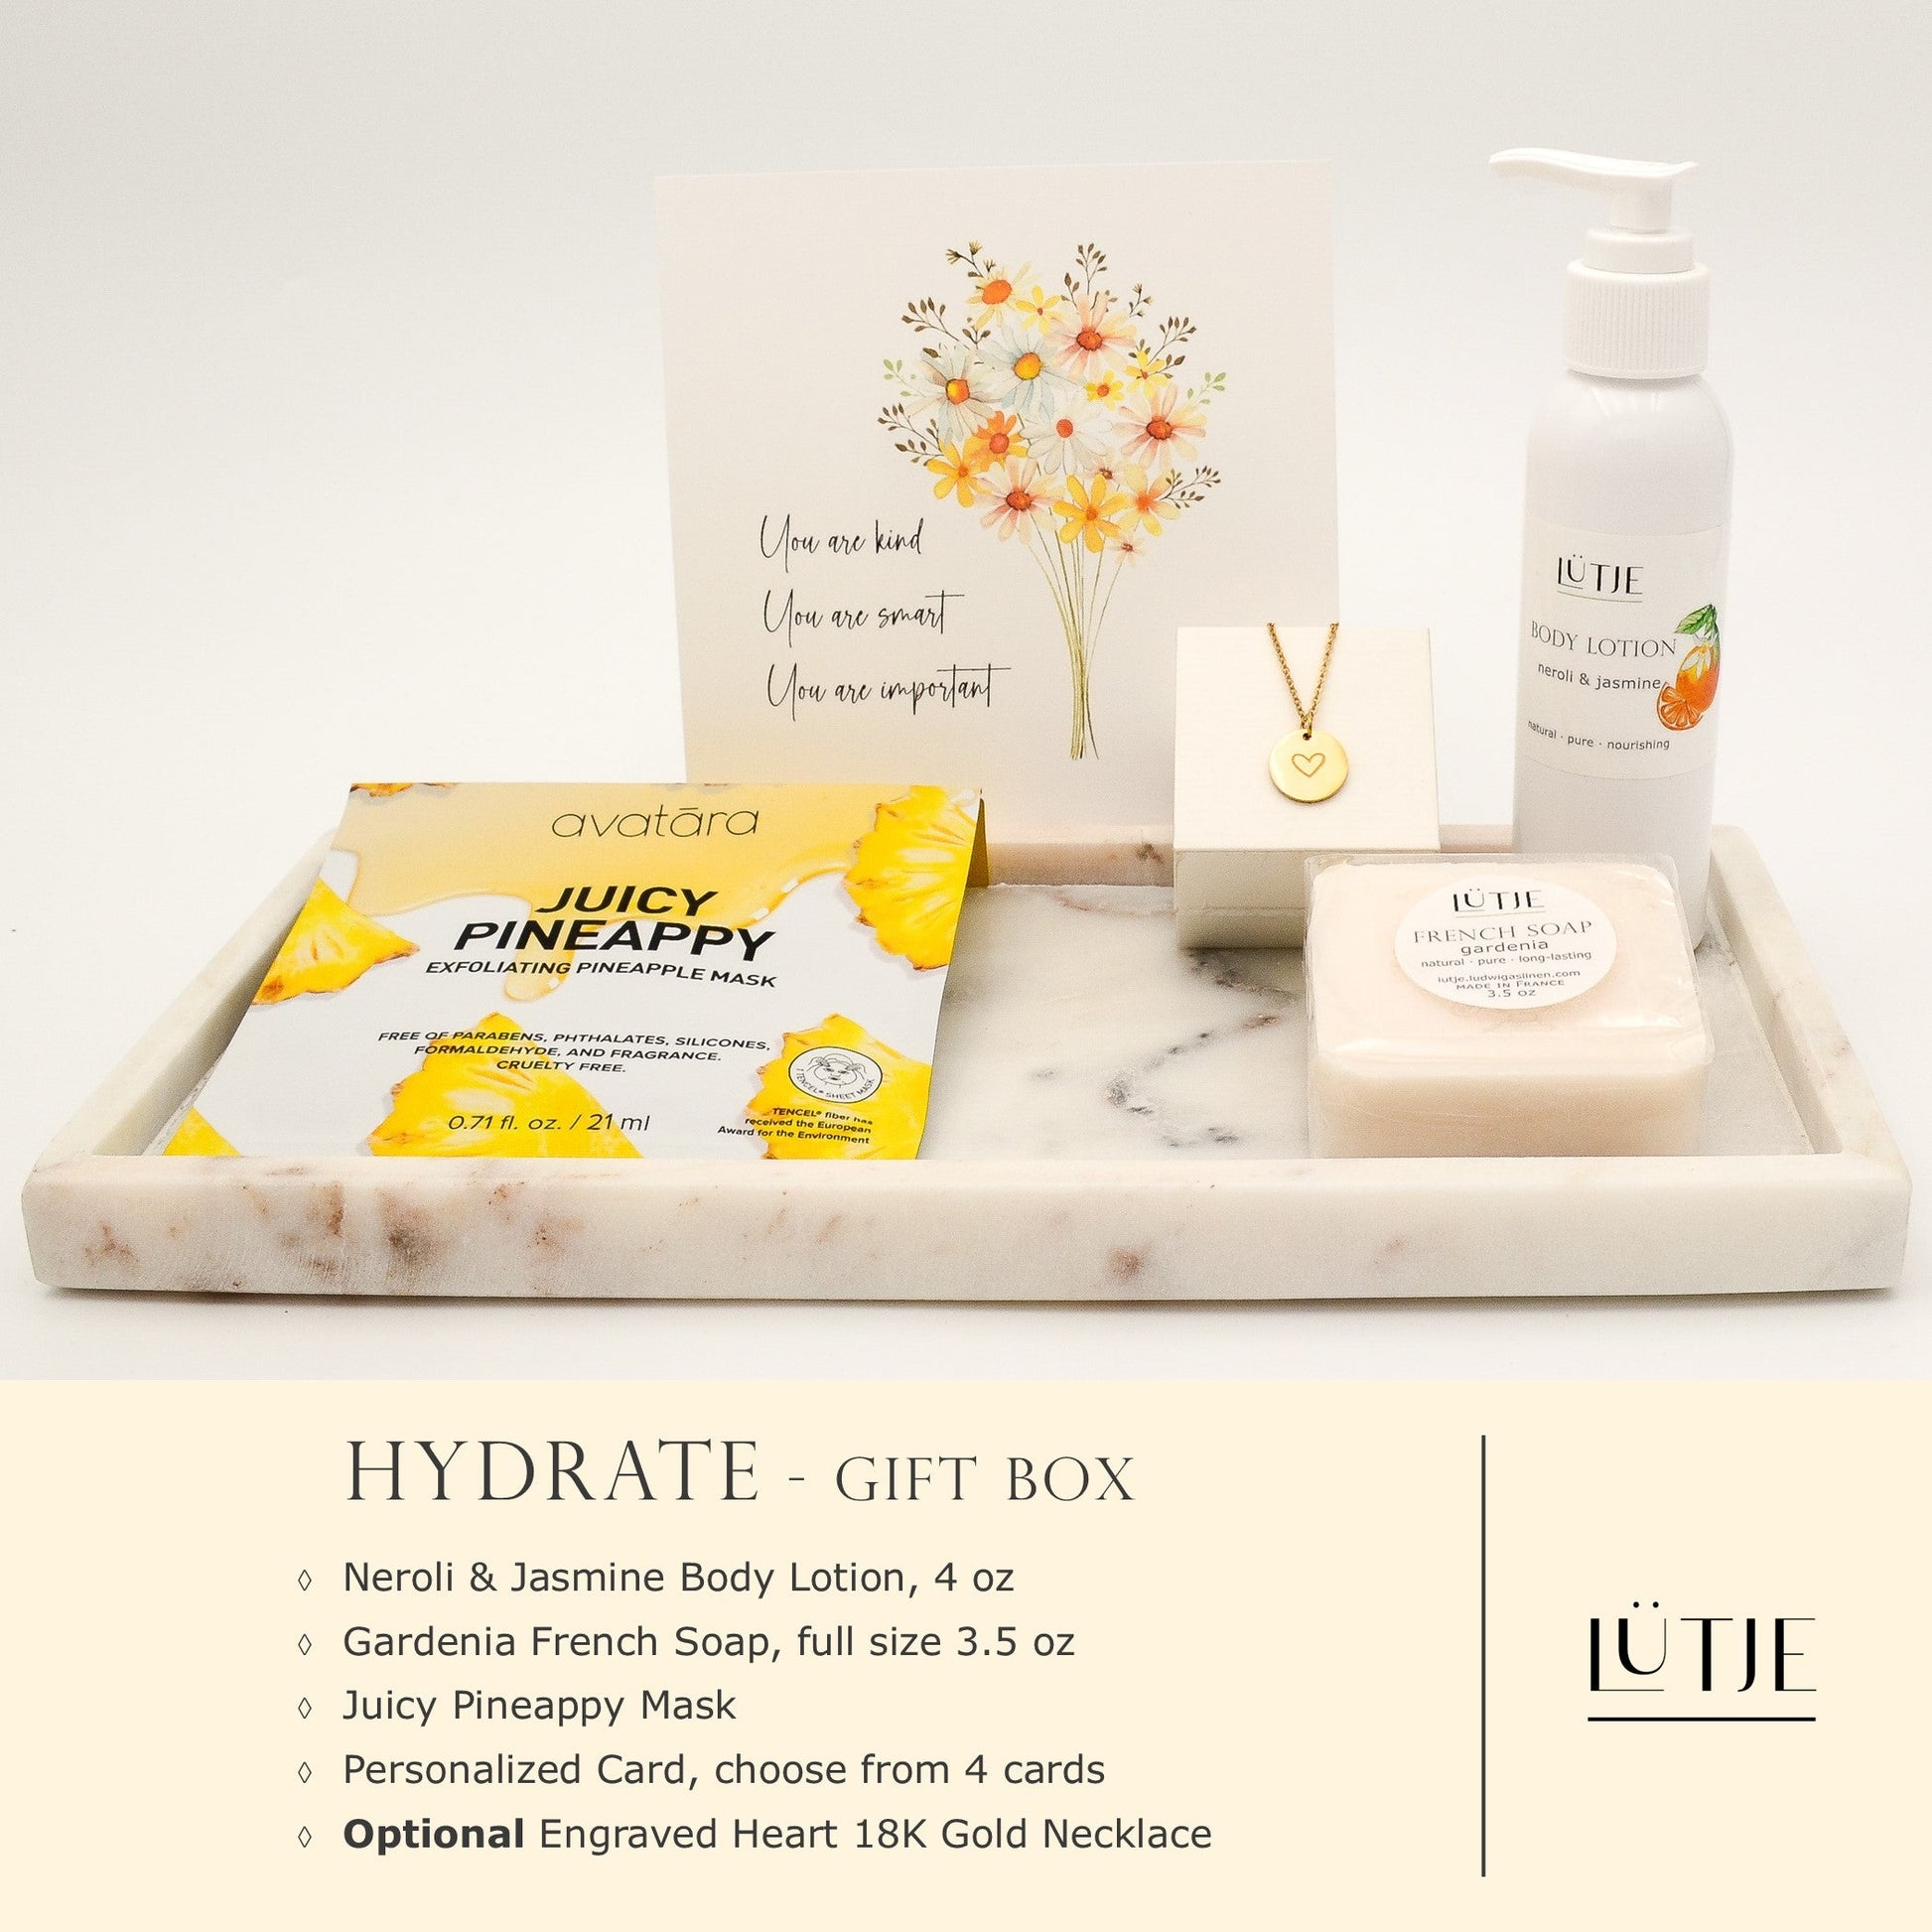 Hydrate Gift Box for women, daughter, mom, BFF, wife, sister or grandma, includes Neroli & Jasmine body lotion, French soap, hydrating face mask, and optional 18K gold-plated necklace with engraved heart.